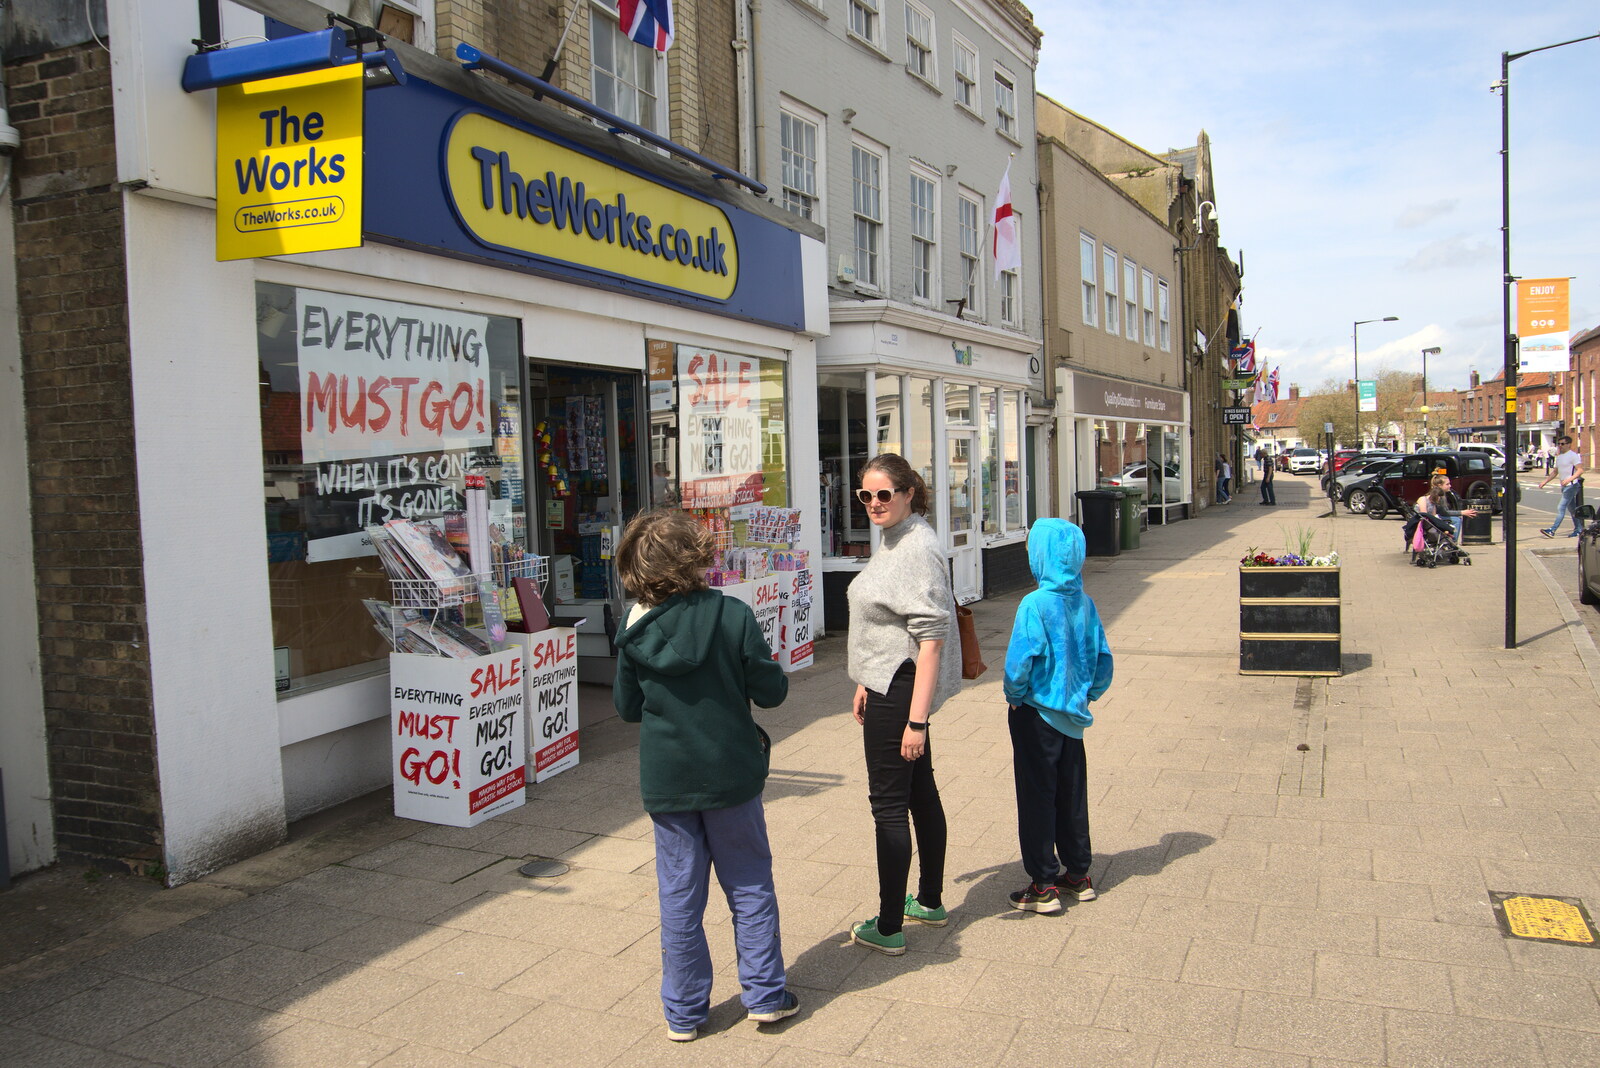 The Works in Swaffham is closing down from A Vaccination Afternoon, Swaffham, Norfolk - 9th May 2021